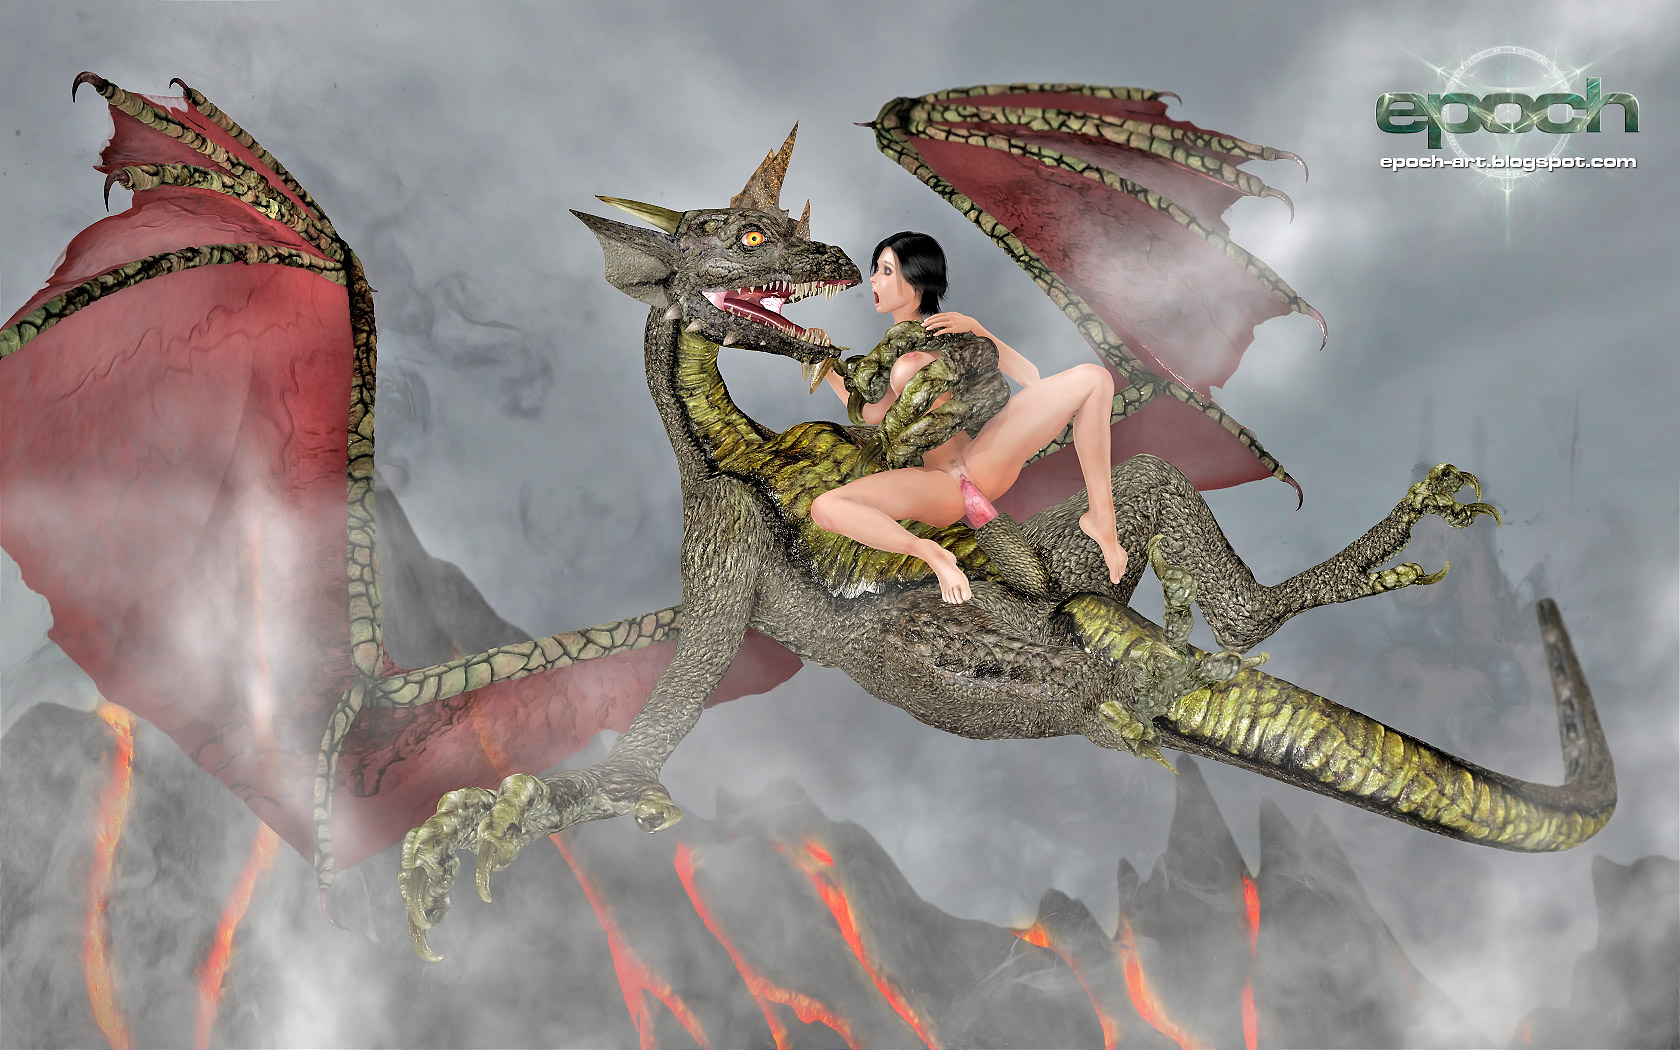 Dragon Human Sex - Horny dragon goes crazy for some human pussy at 3dEvilMonsters